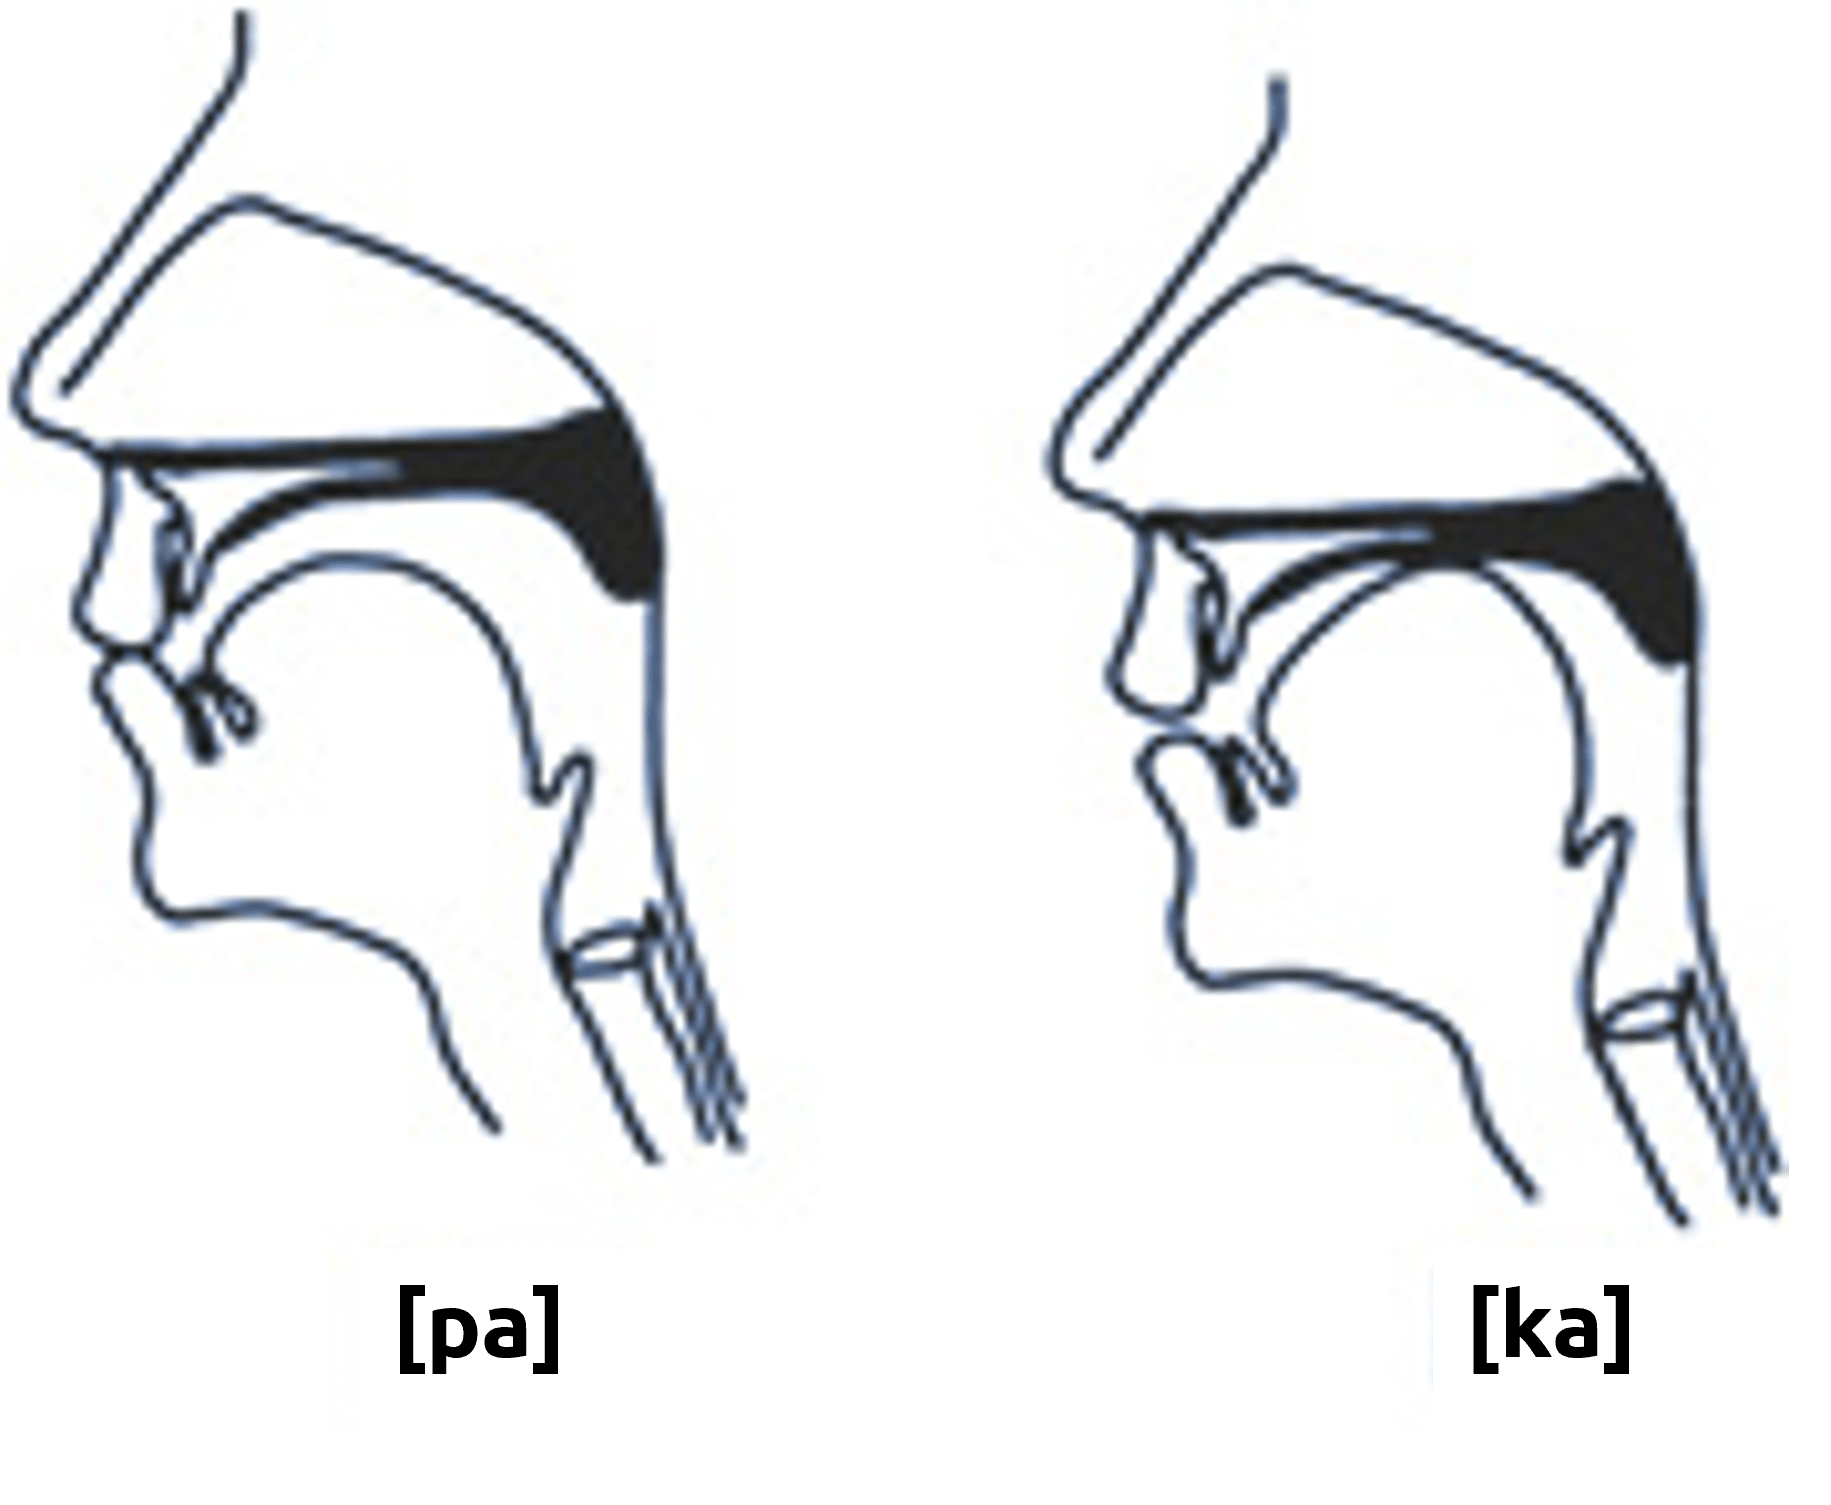 Example of pronunciation that requires velopharyngeal closure